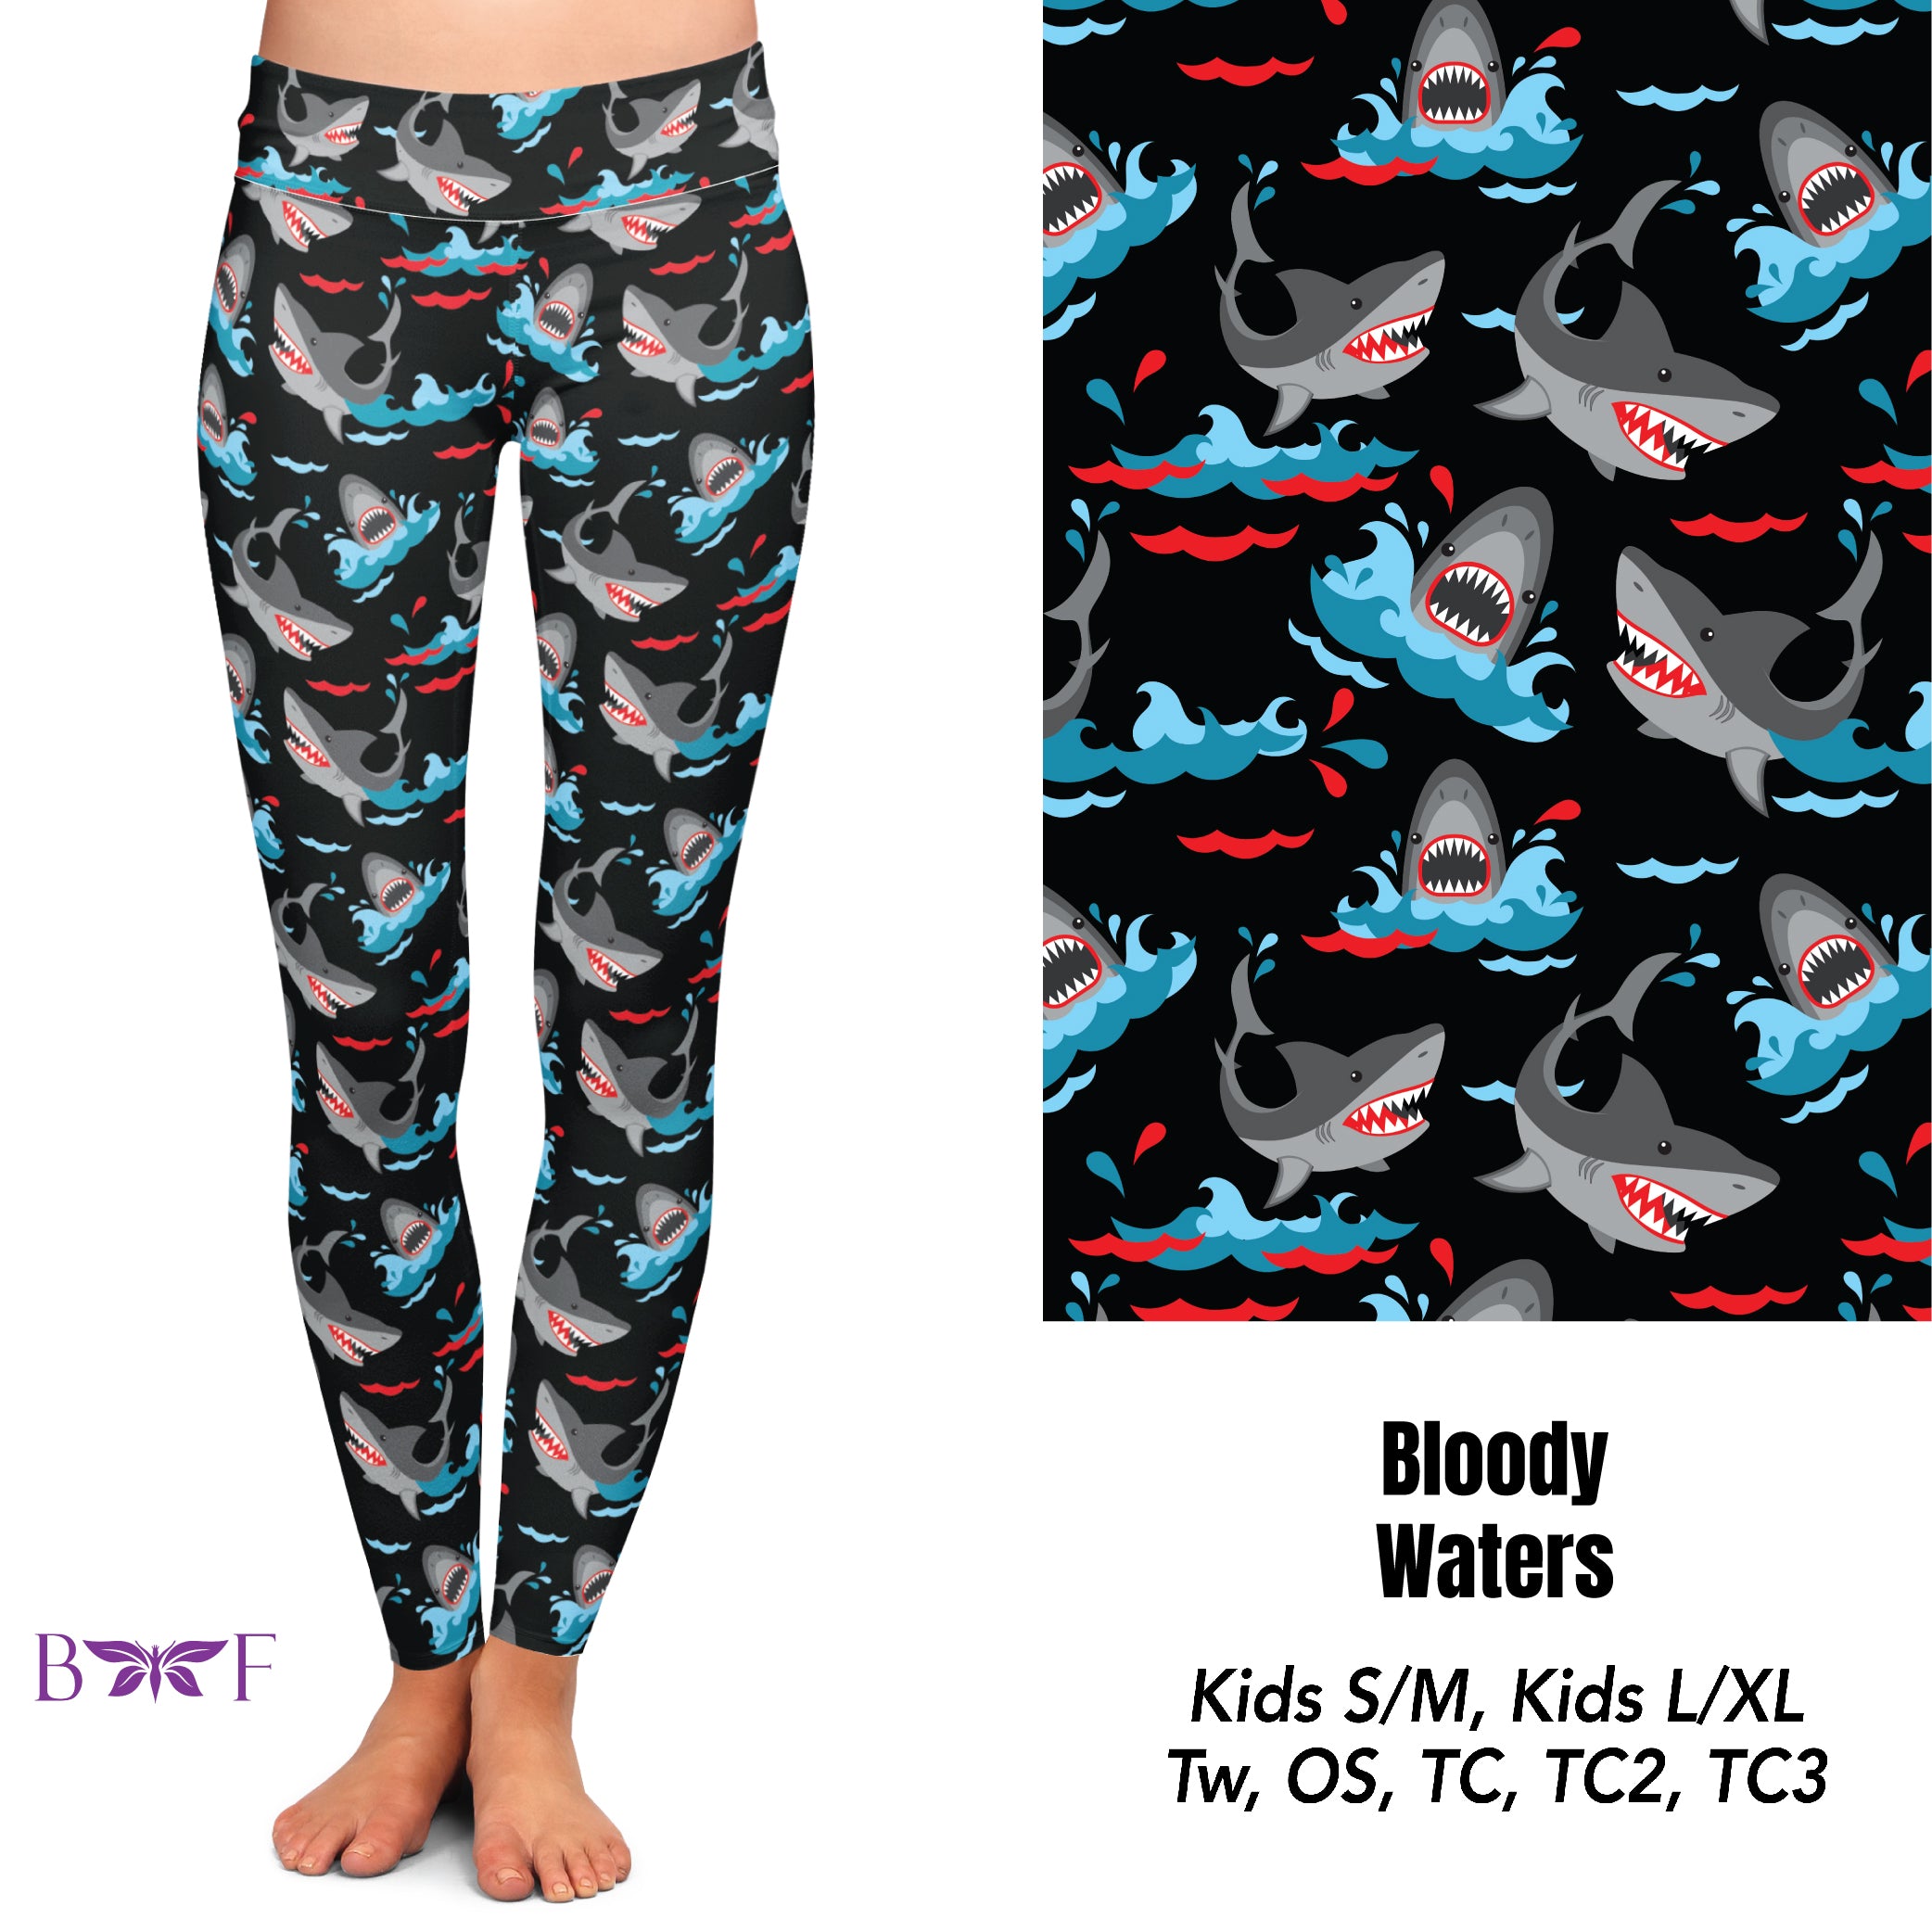 Bloody Waters Leggings and Joggers